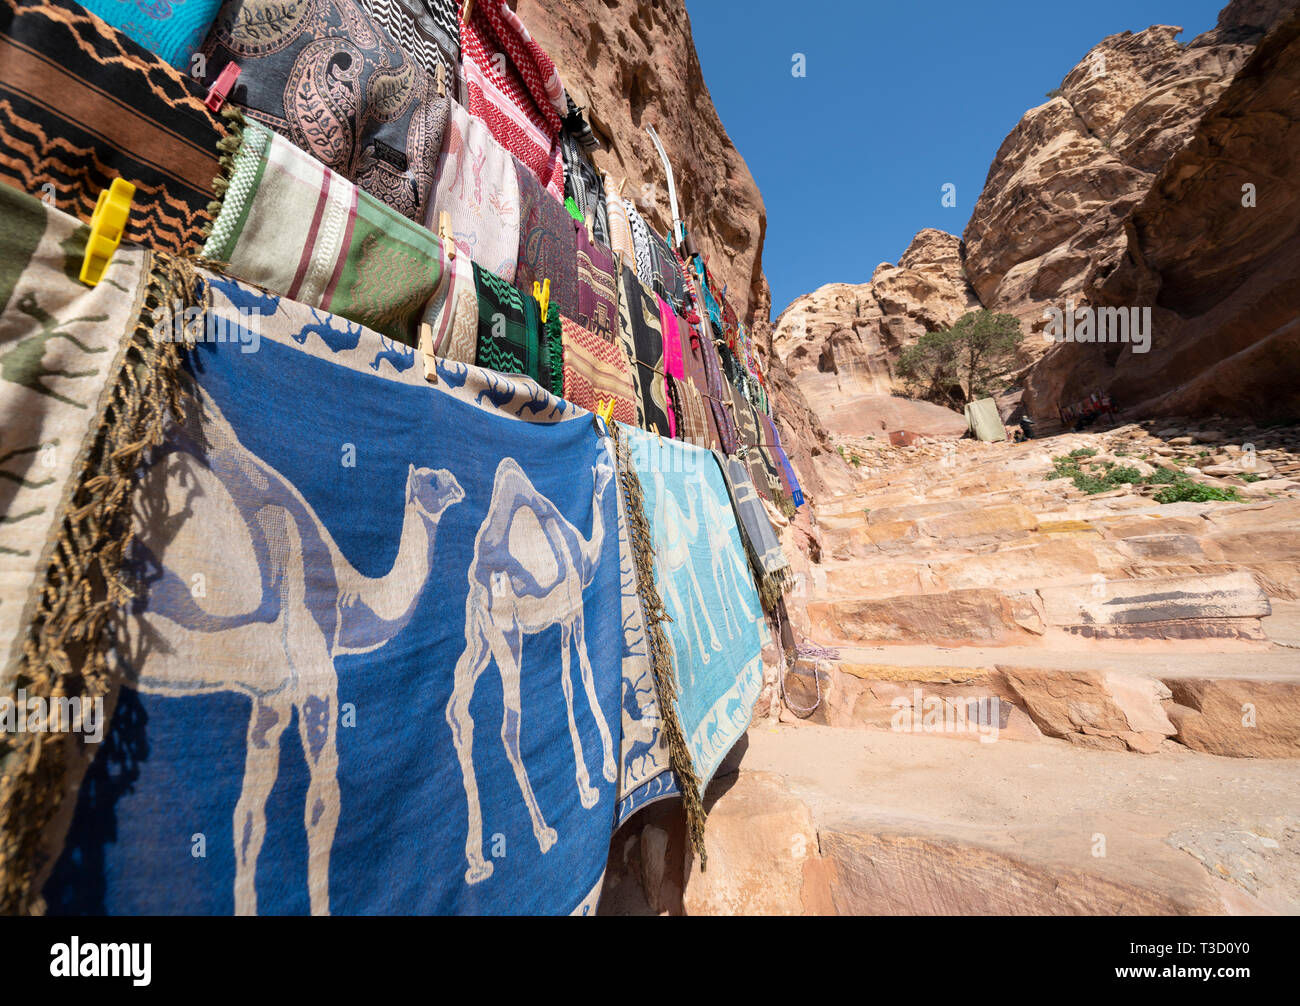 Detail of tourist gift stall with pashminas and other colourful woven local textiles at Petra, Jordan Stock Photo